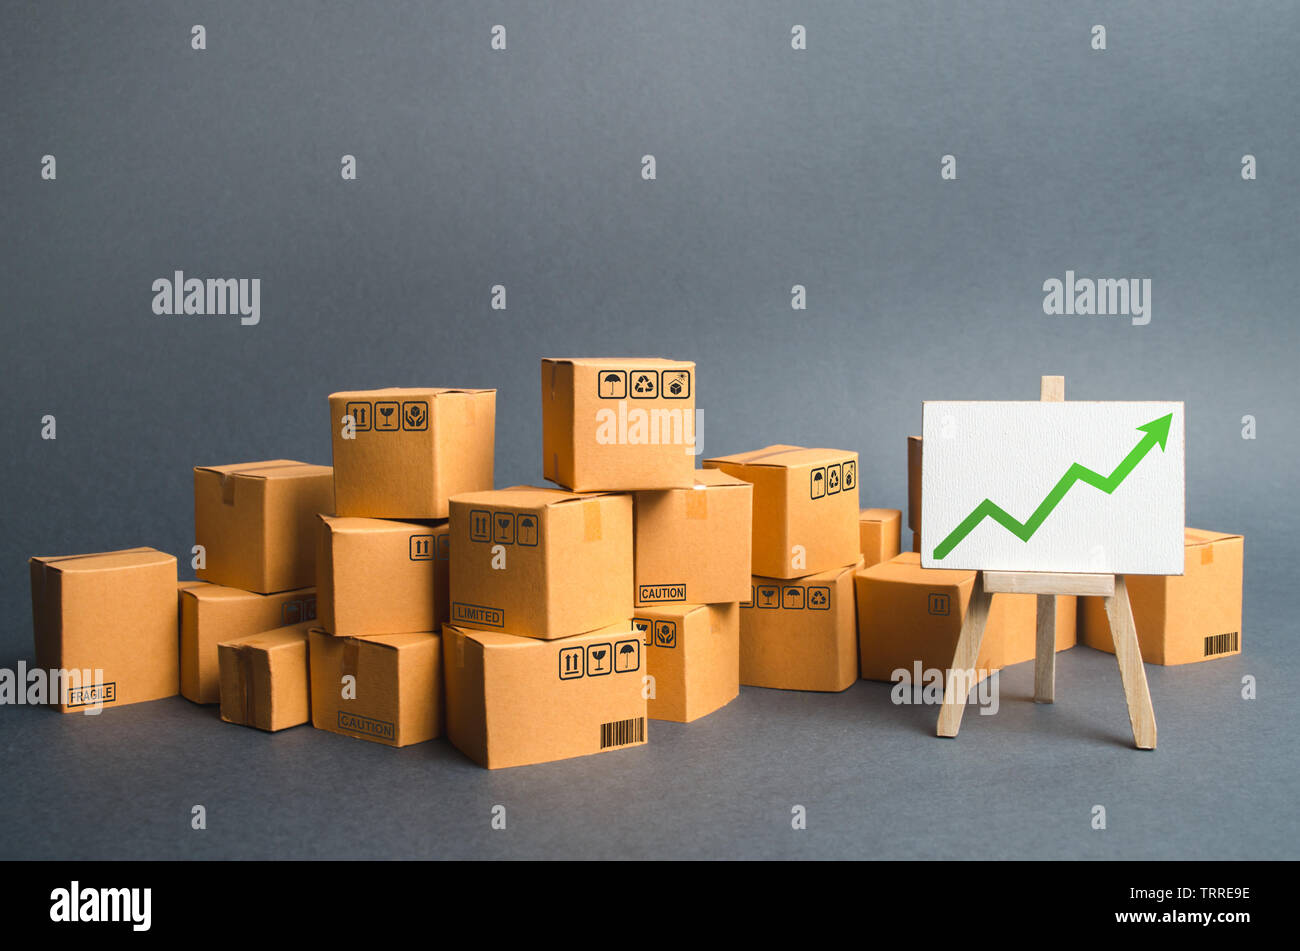 Lots of cardboard boxes and a stand with a green up arrow. rate growth of production of goods and products, increasing economic indicators. Increasing Stock Photo